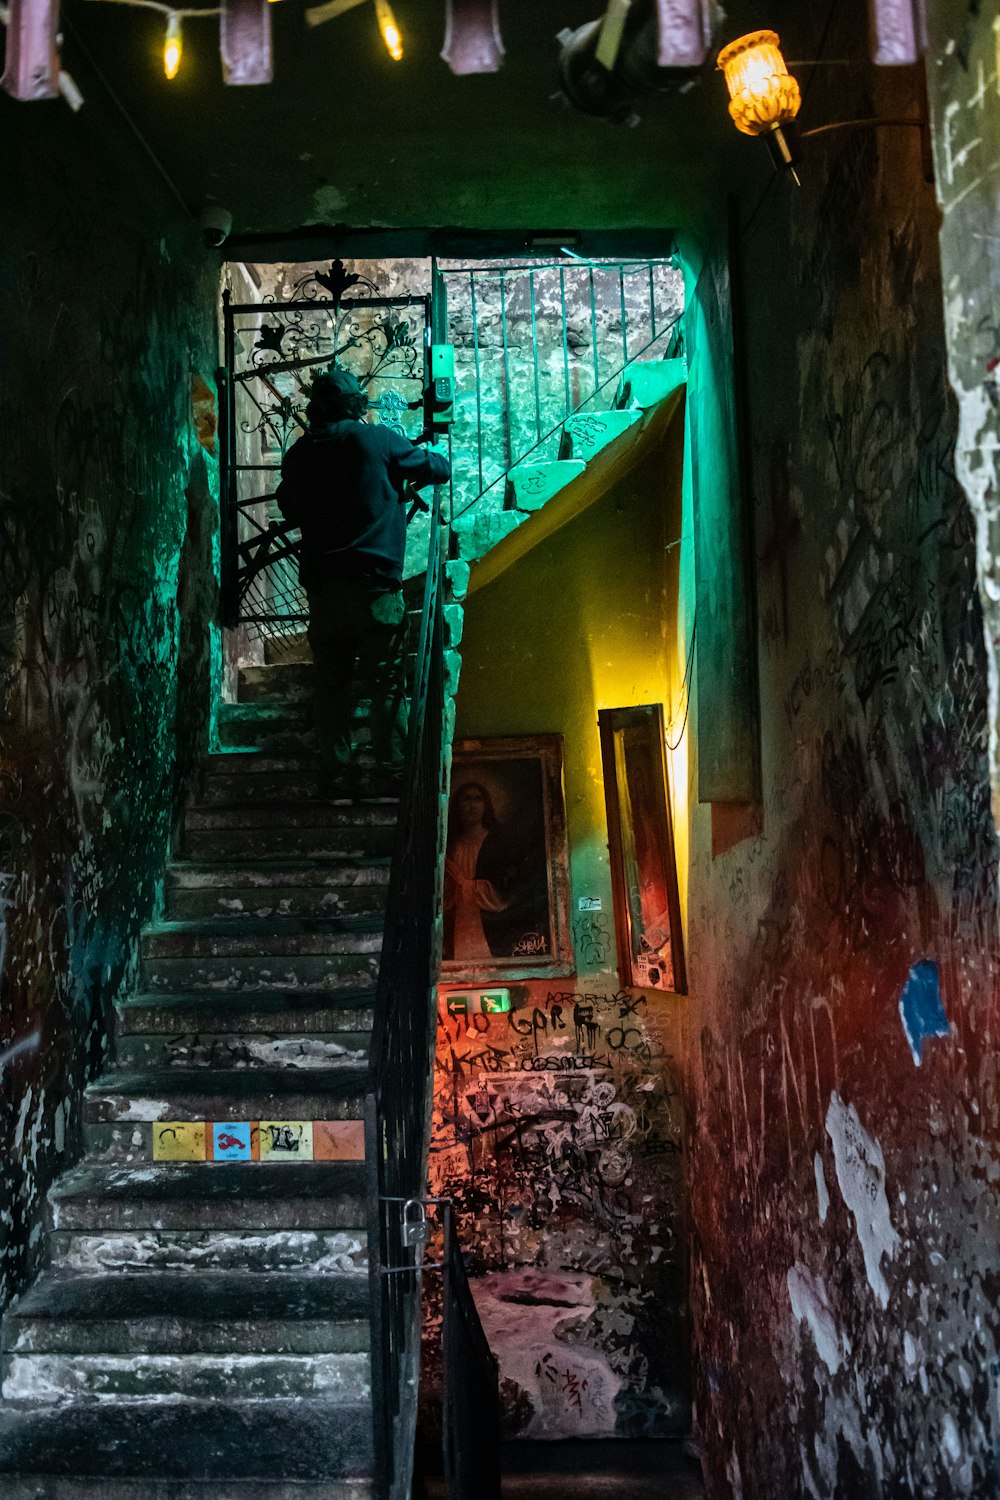 person at the staircase inside building